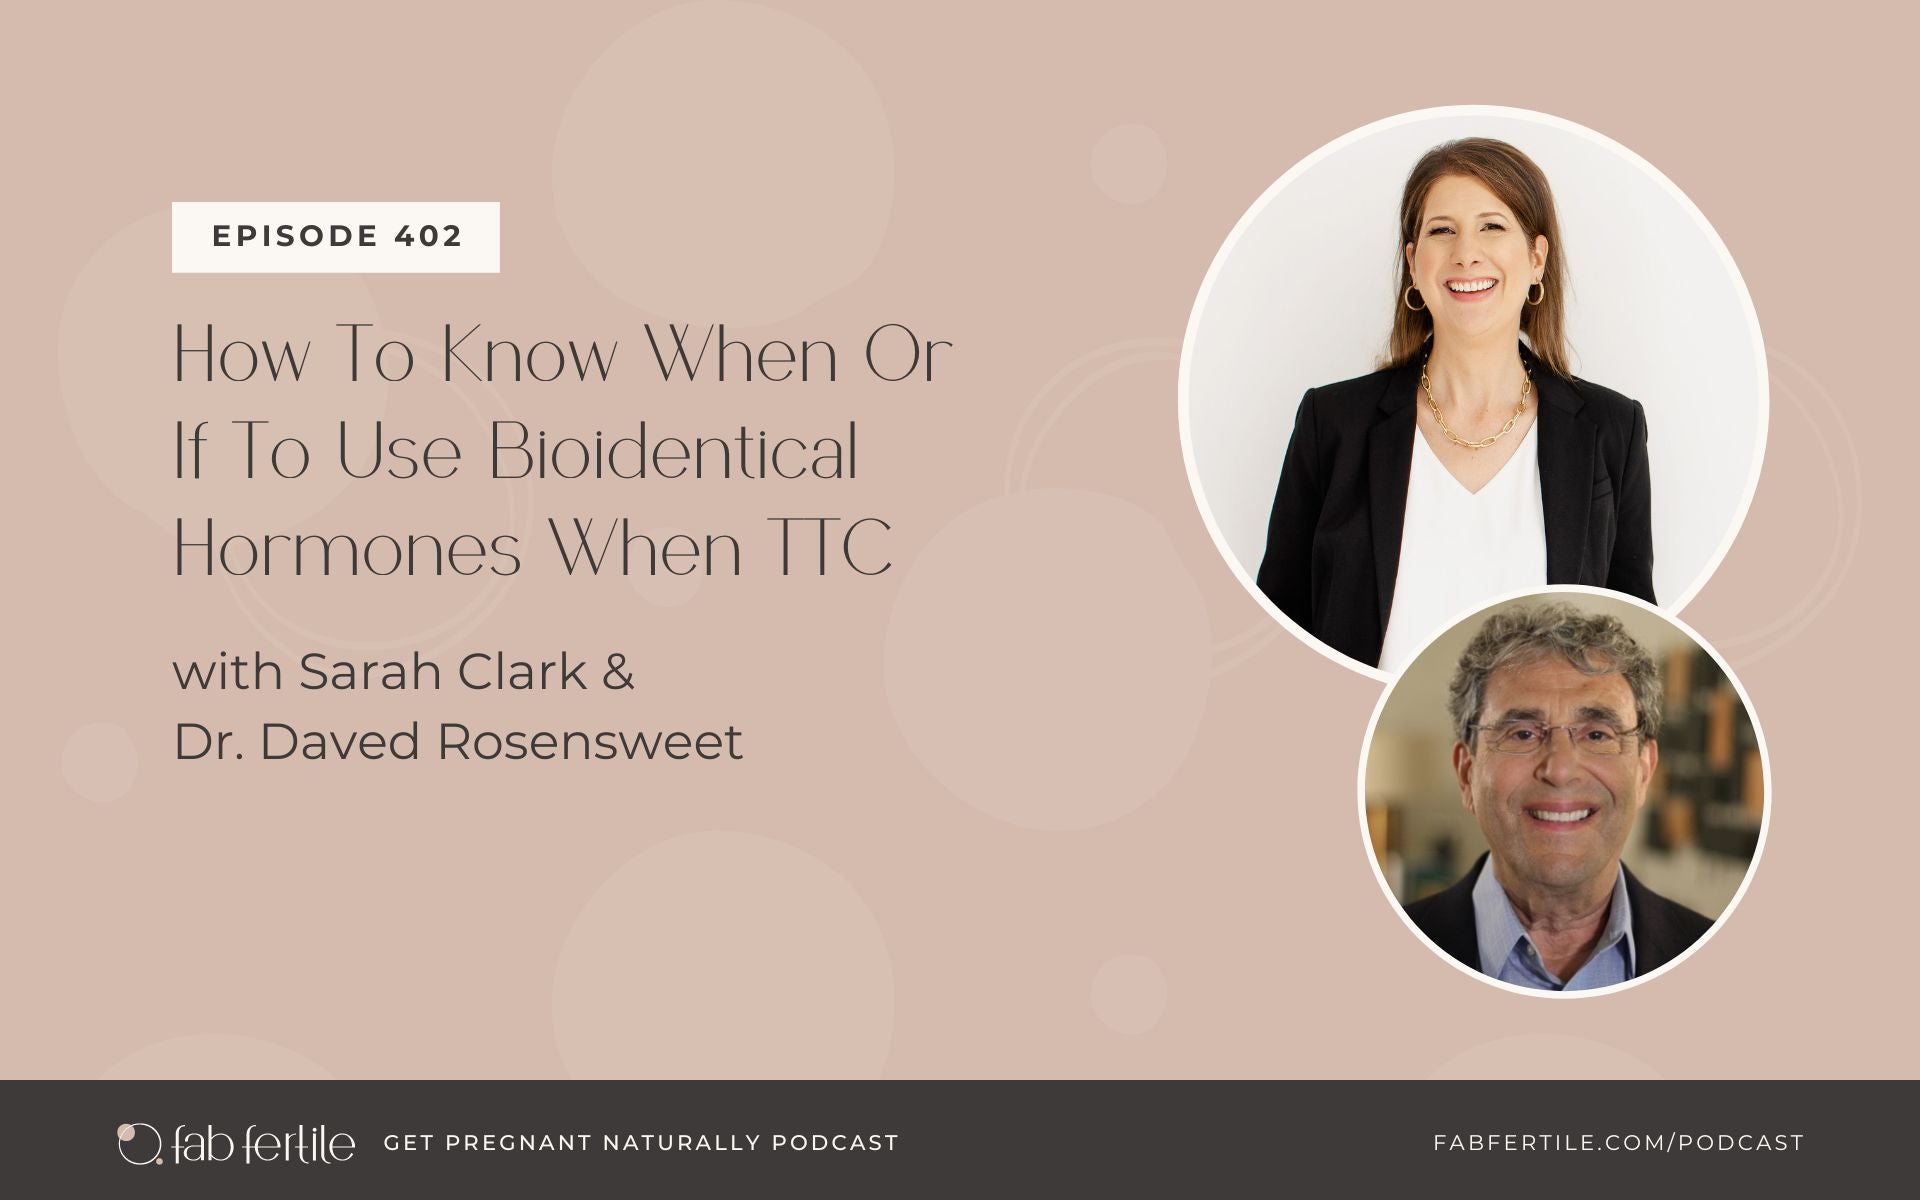 How To Know When Or If To Use Bioidentical Hormones When TTC